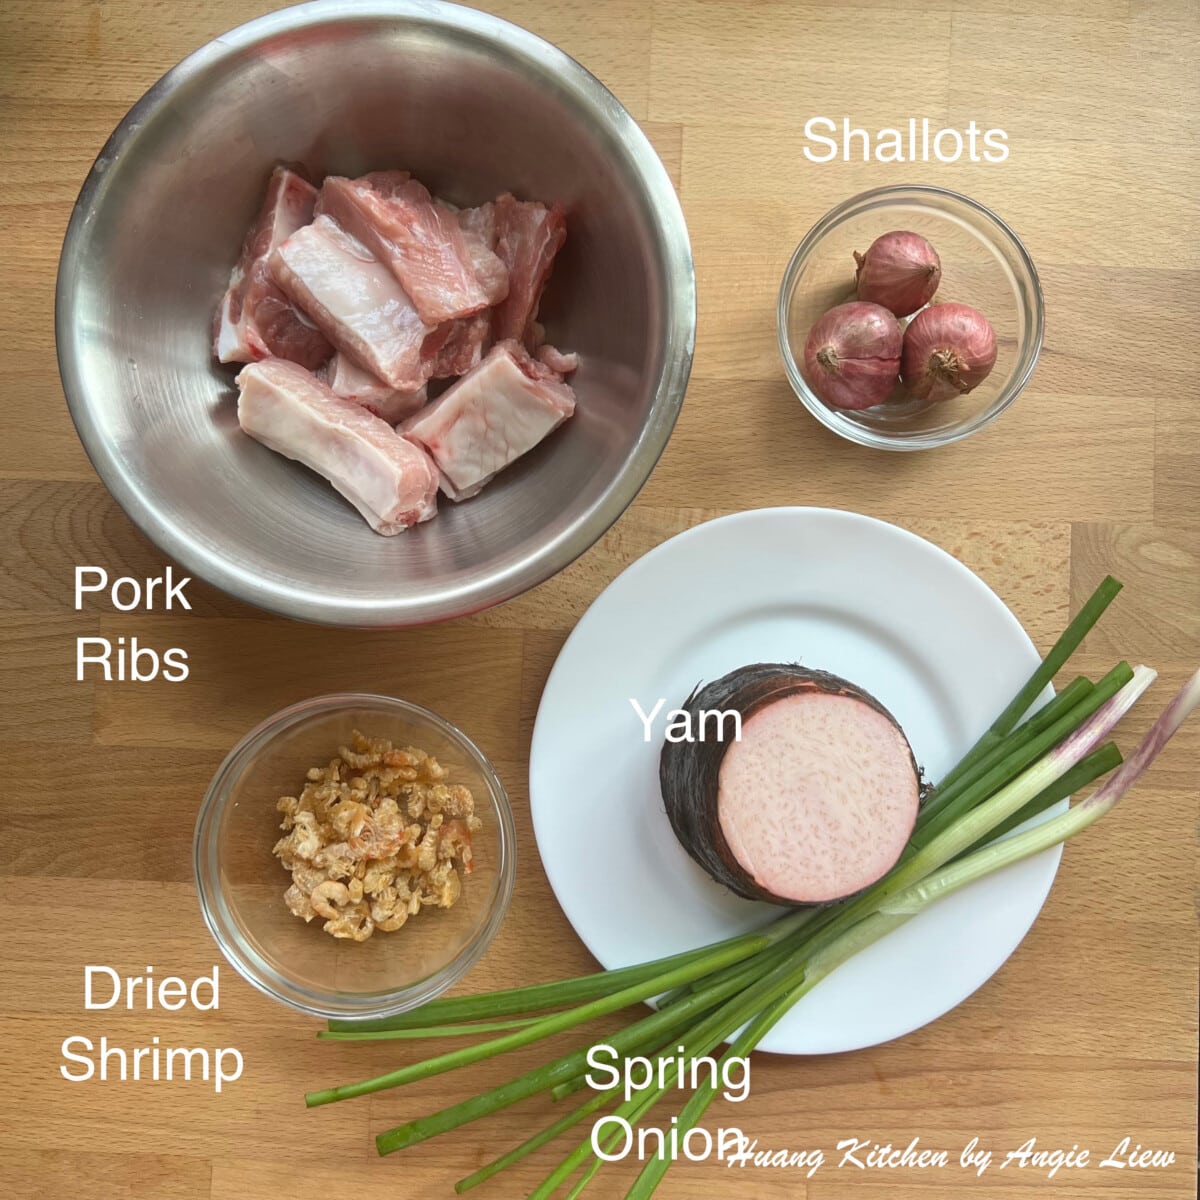 Ingredients for braised pork ribs with yam.